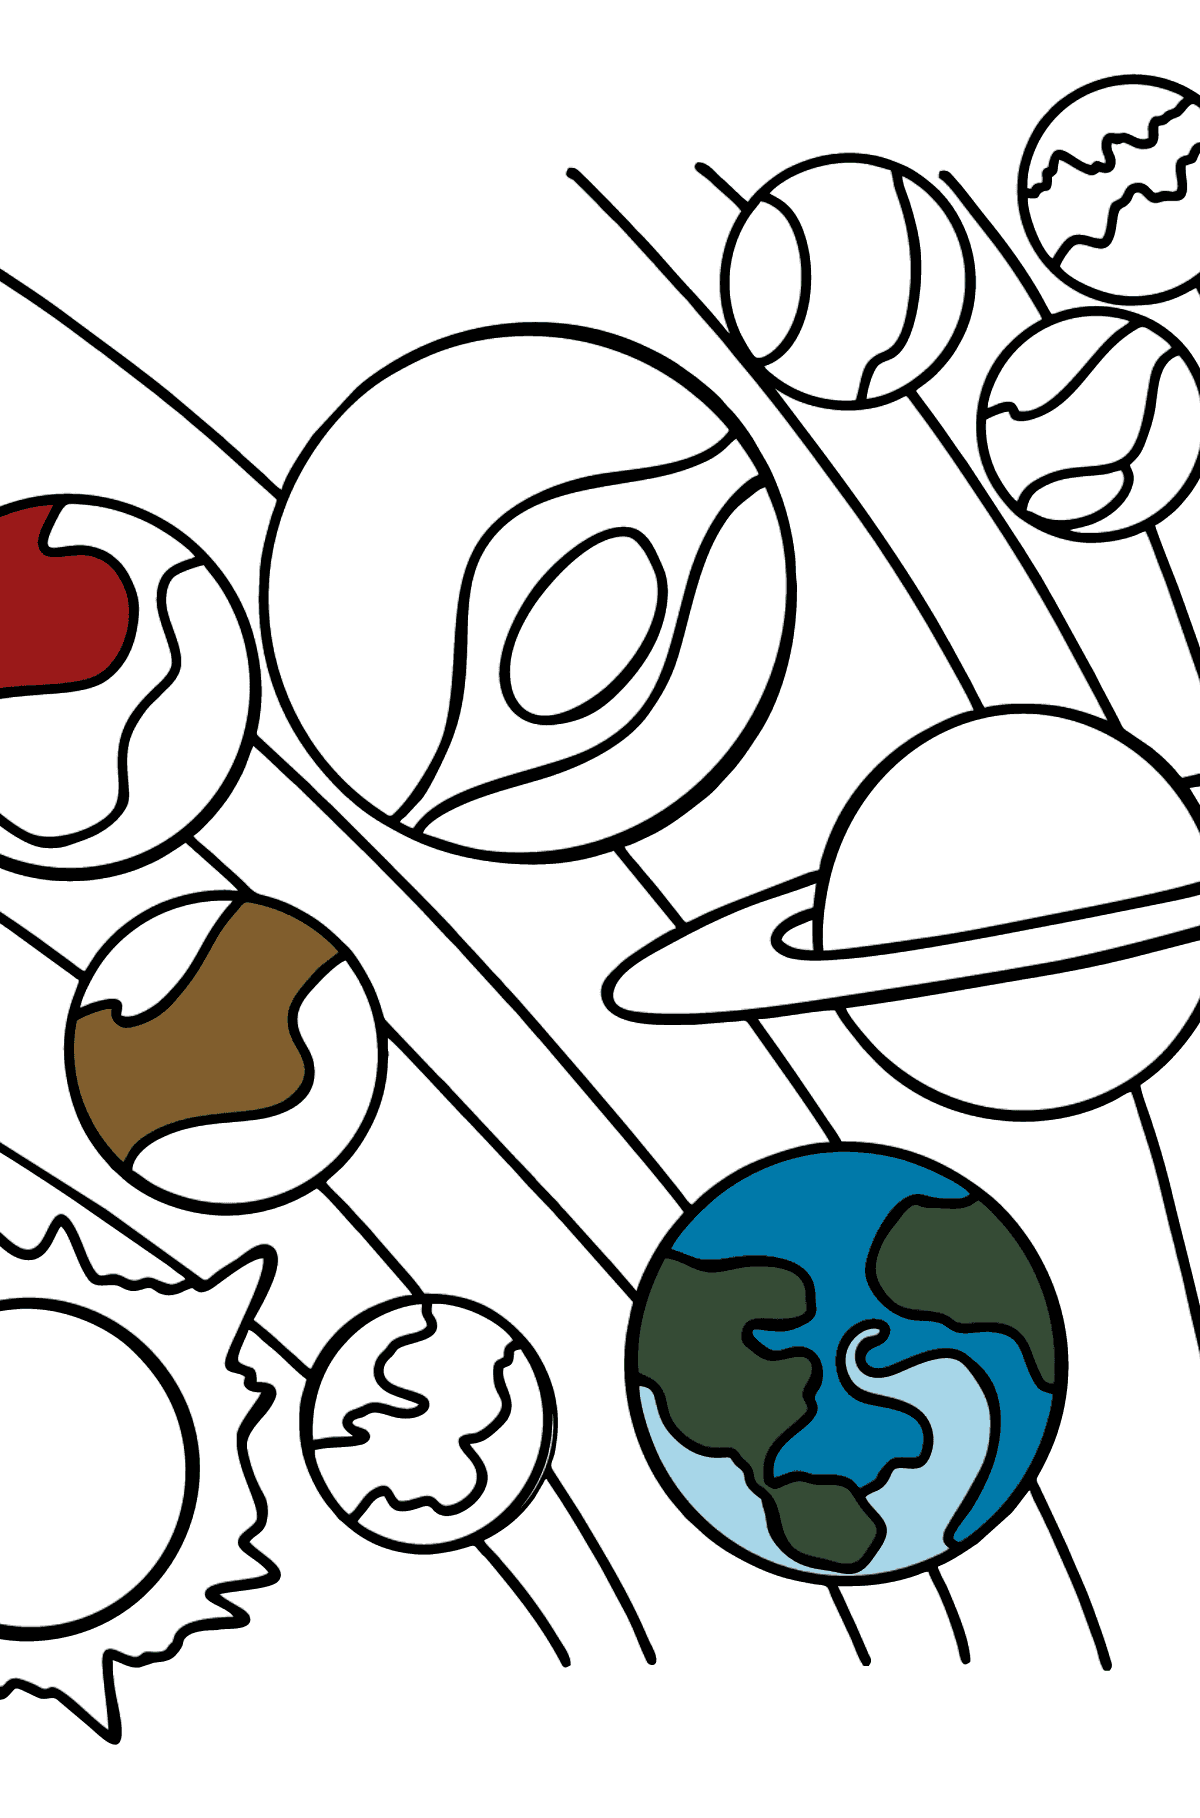 Solar System Coloring Page for kids - Coloring Pages for Kids